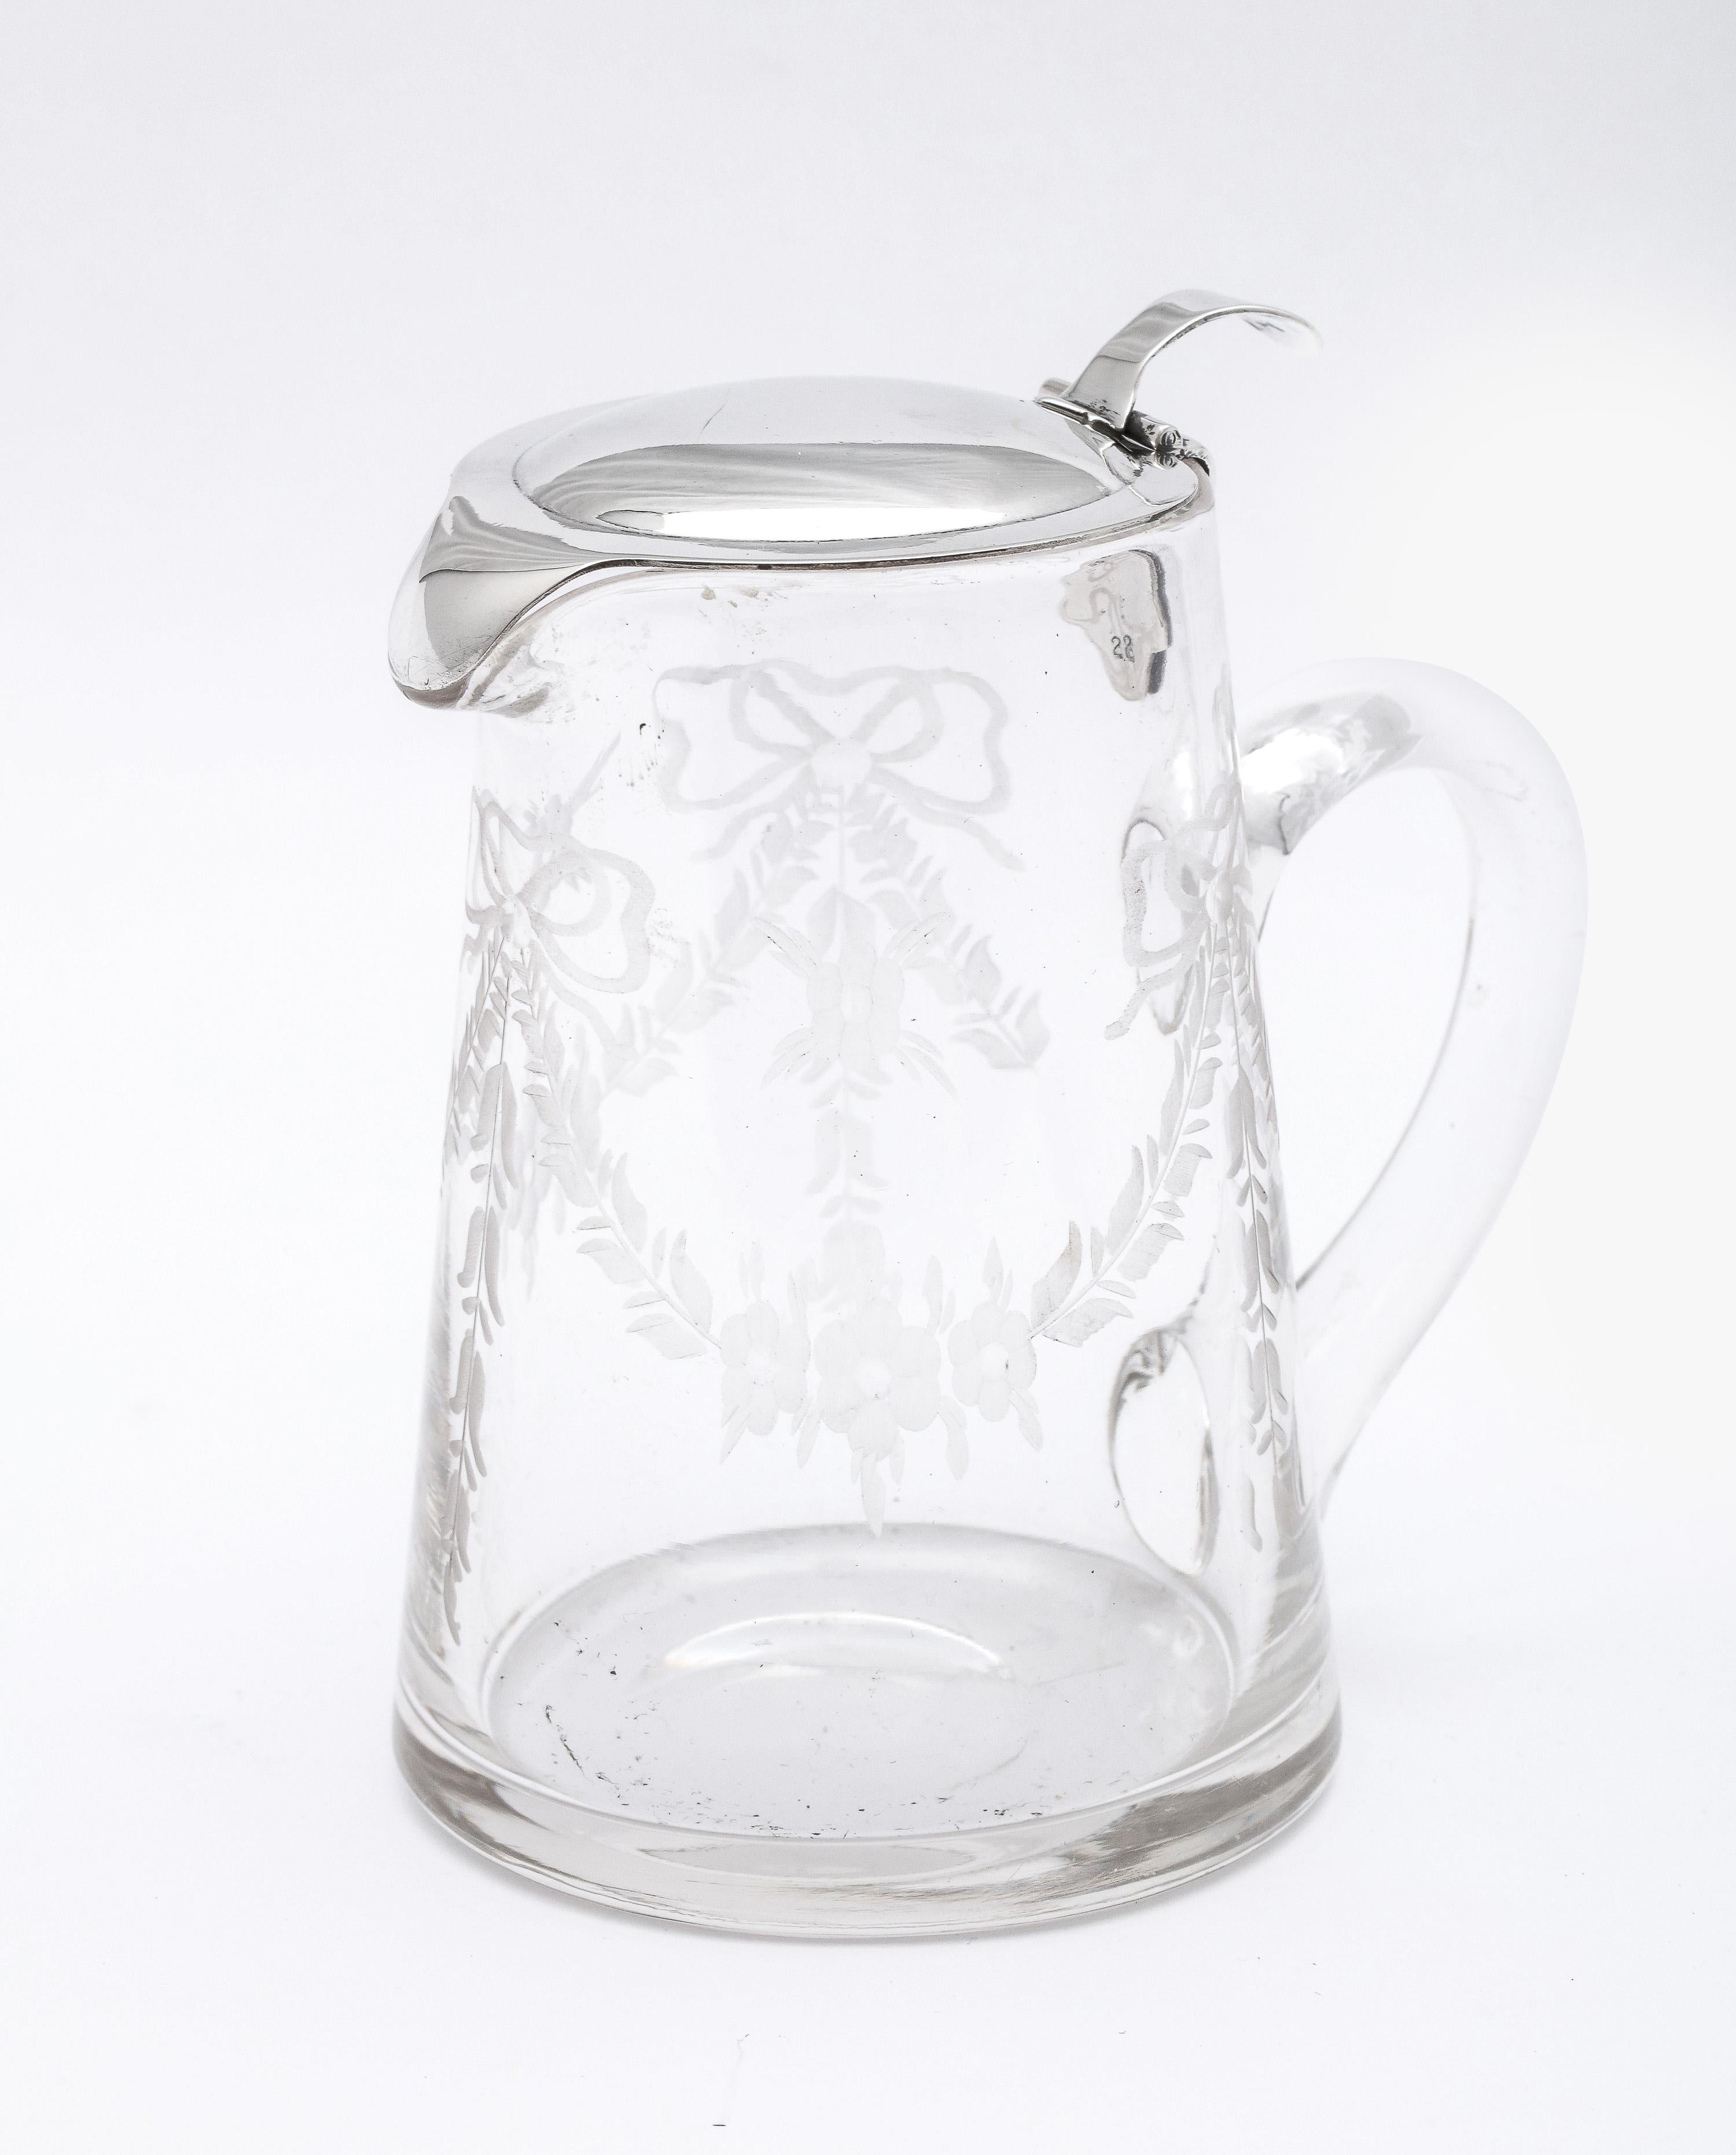 Edwardian period, sterling silver-mounted, etched glass syrup jug with hinged lid, T.G. Hawkes and Company (makers), New York, Ca. 1910. The Hawkes Company appears both on the sterling silver lid and is etched into the underside of the jug itself